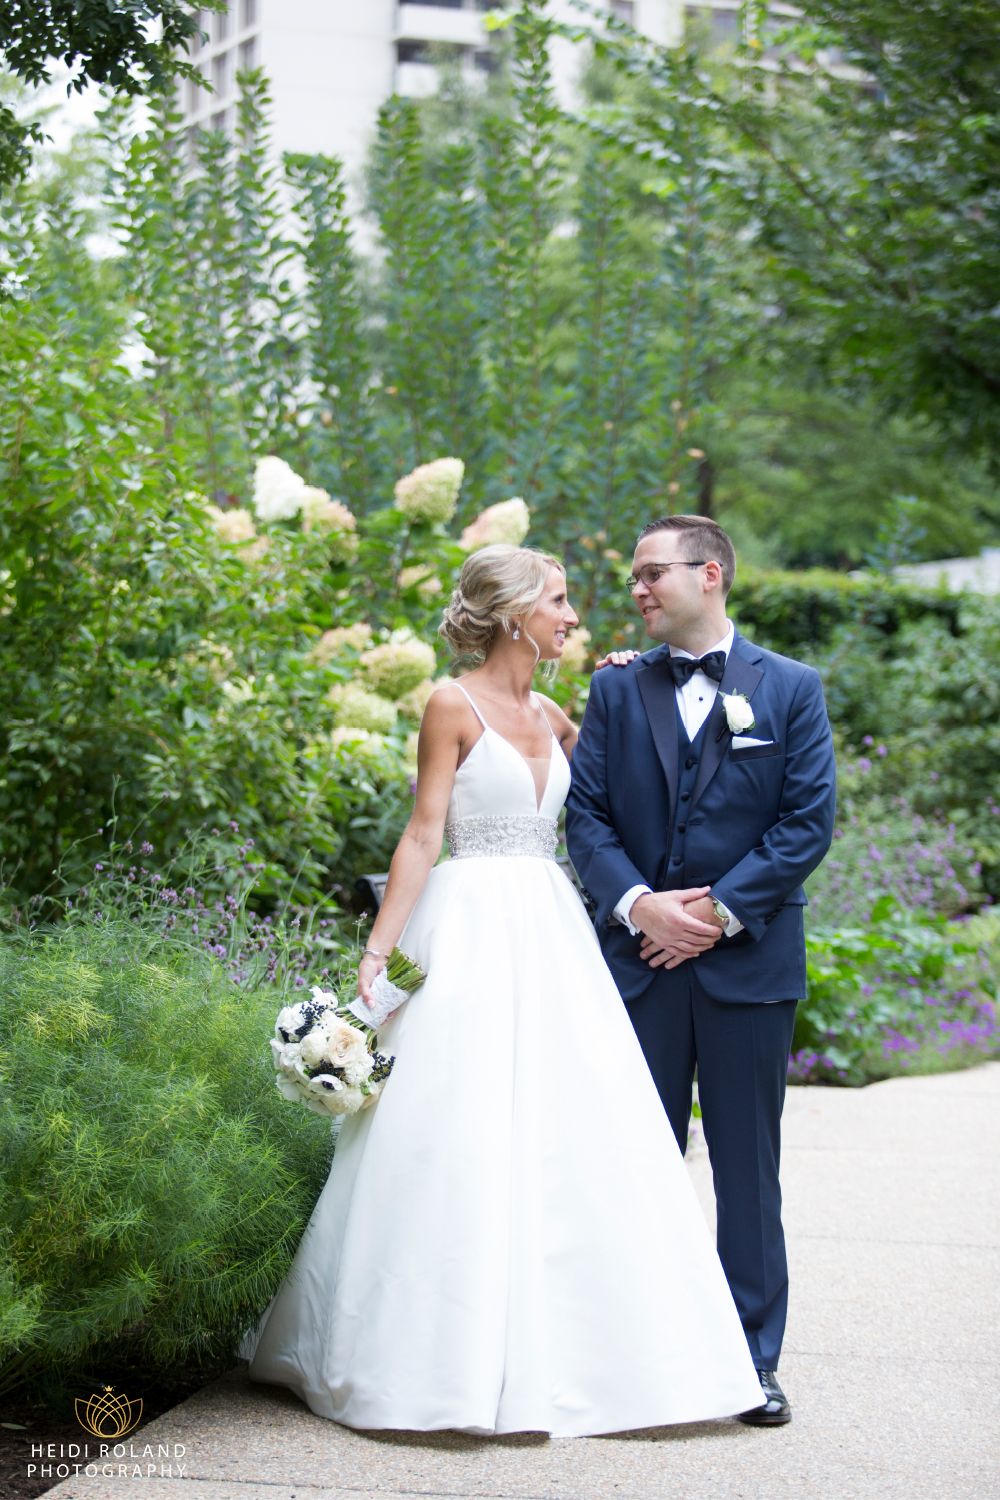 How To Become An Officiant In Pa